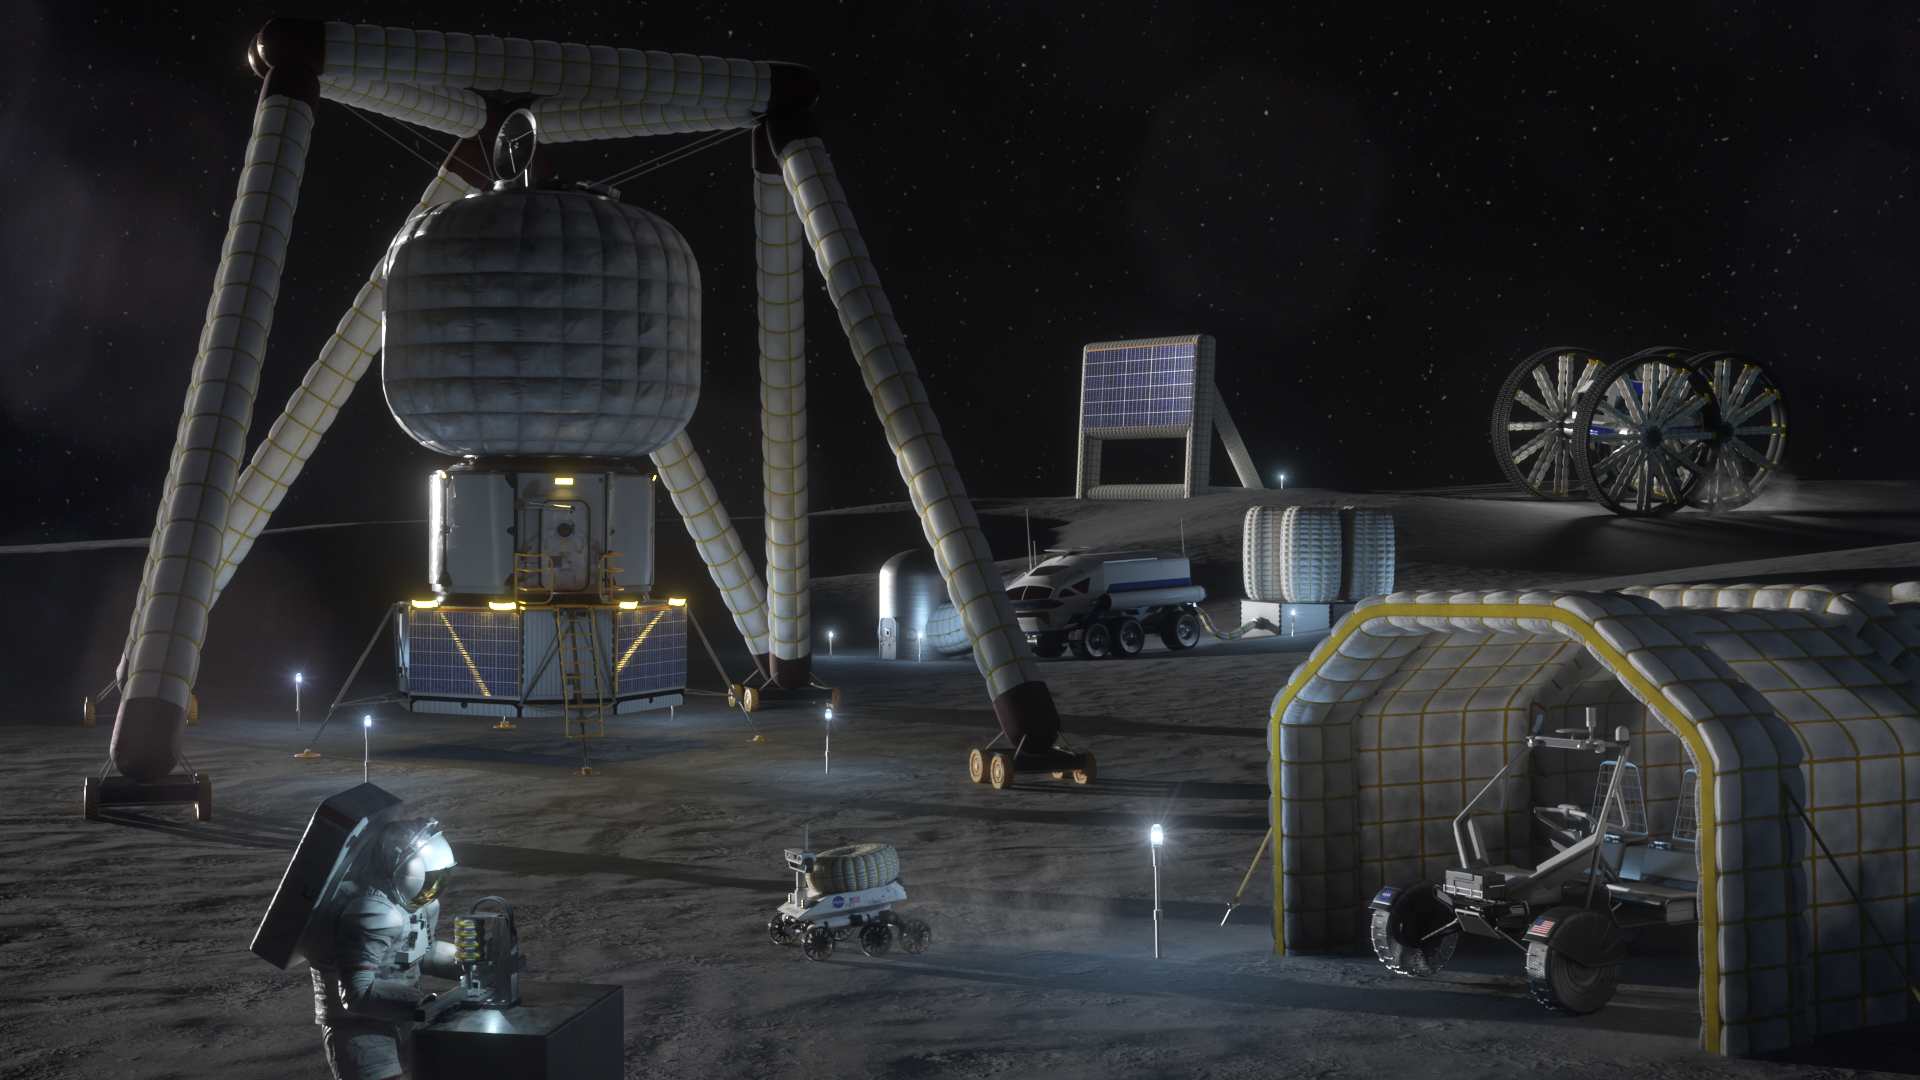 Artist depiction of inflatable structures on the surface of the Moon including an inflatable manufacturing press, dust shield, garage, storage tanks, mobility vehicles, and a solar array.